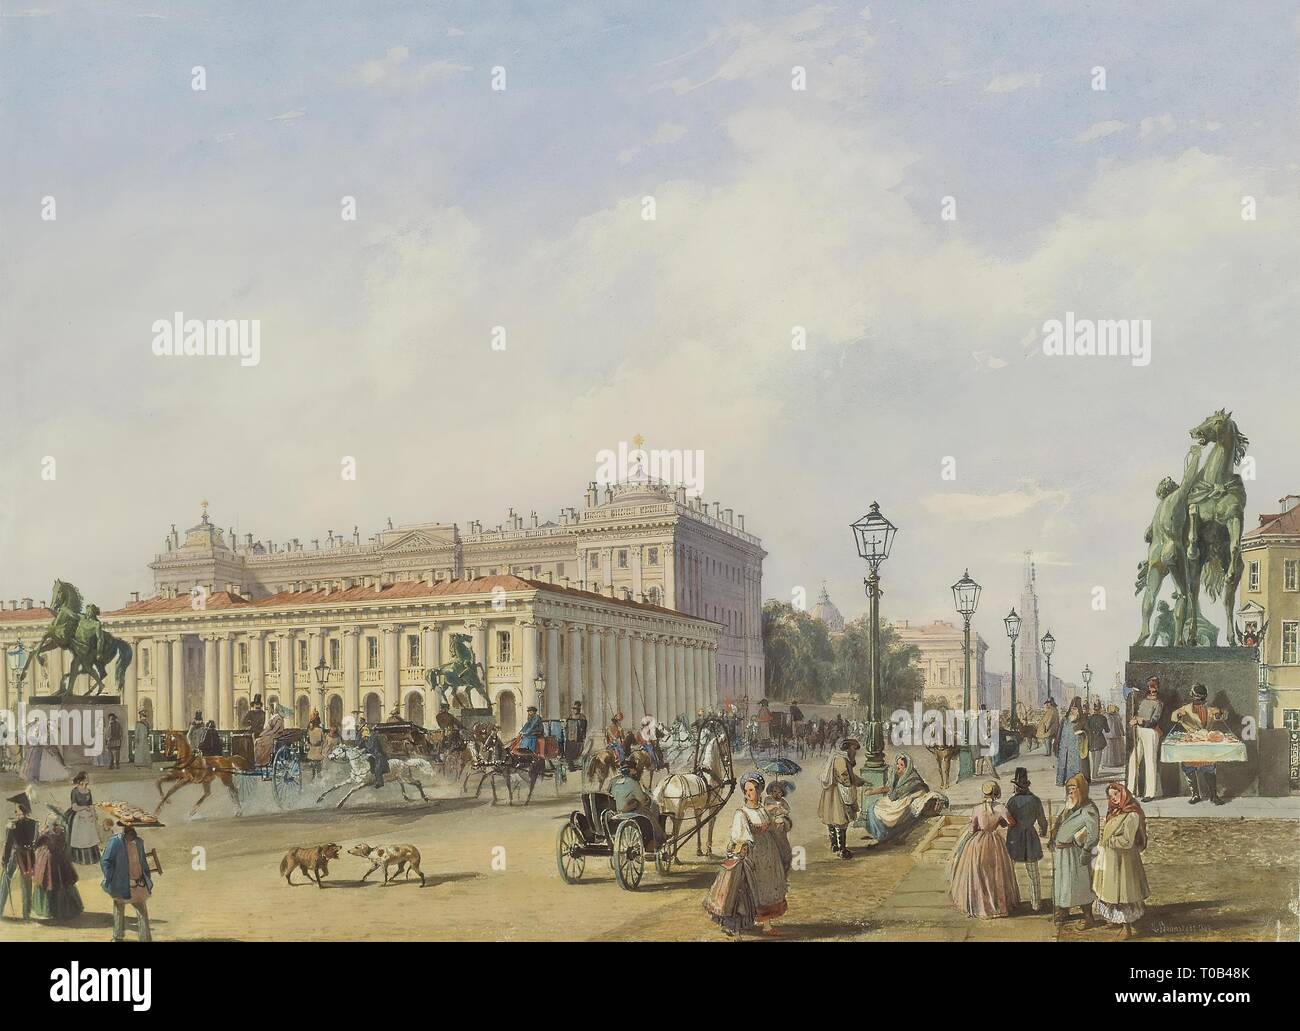 'Nevsky Prospekt by Anichkov Bridge'. Series 'Views of St Petersburg and Moscow', produce as a gift to Queen Victoria on the occasion of the 10th anniversary of her reign. Russia, 1847. Dimensions: 27x37,9 cm. Museum: State Hermitage, St. Petersburg. Author: LUDWIG BOHNSTEDT . Ludwig Franz Karl Bohnstedt. Stock Photo